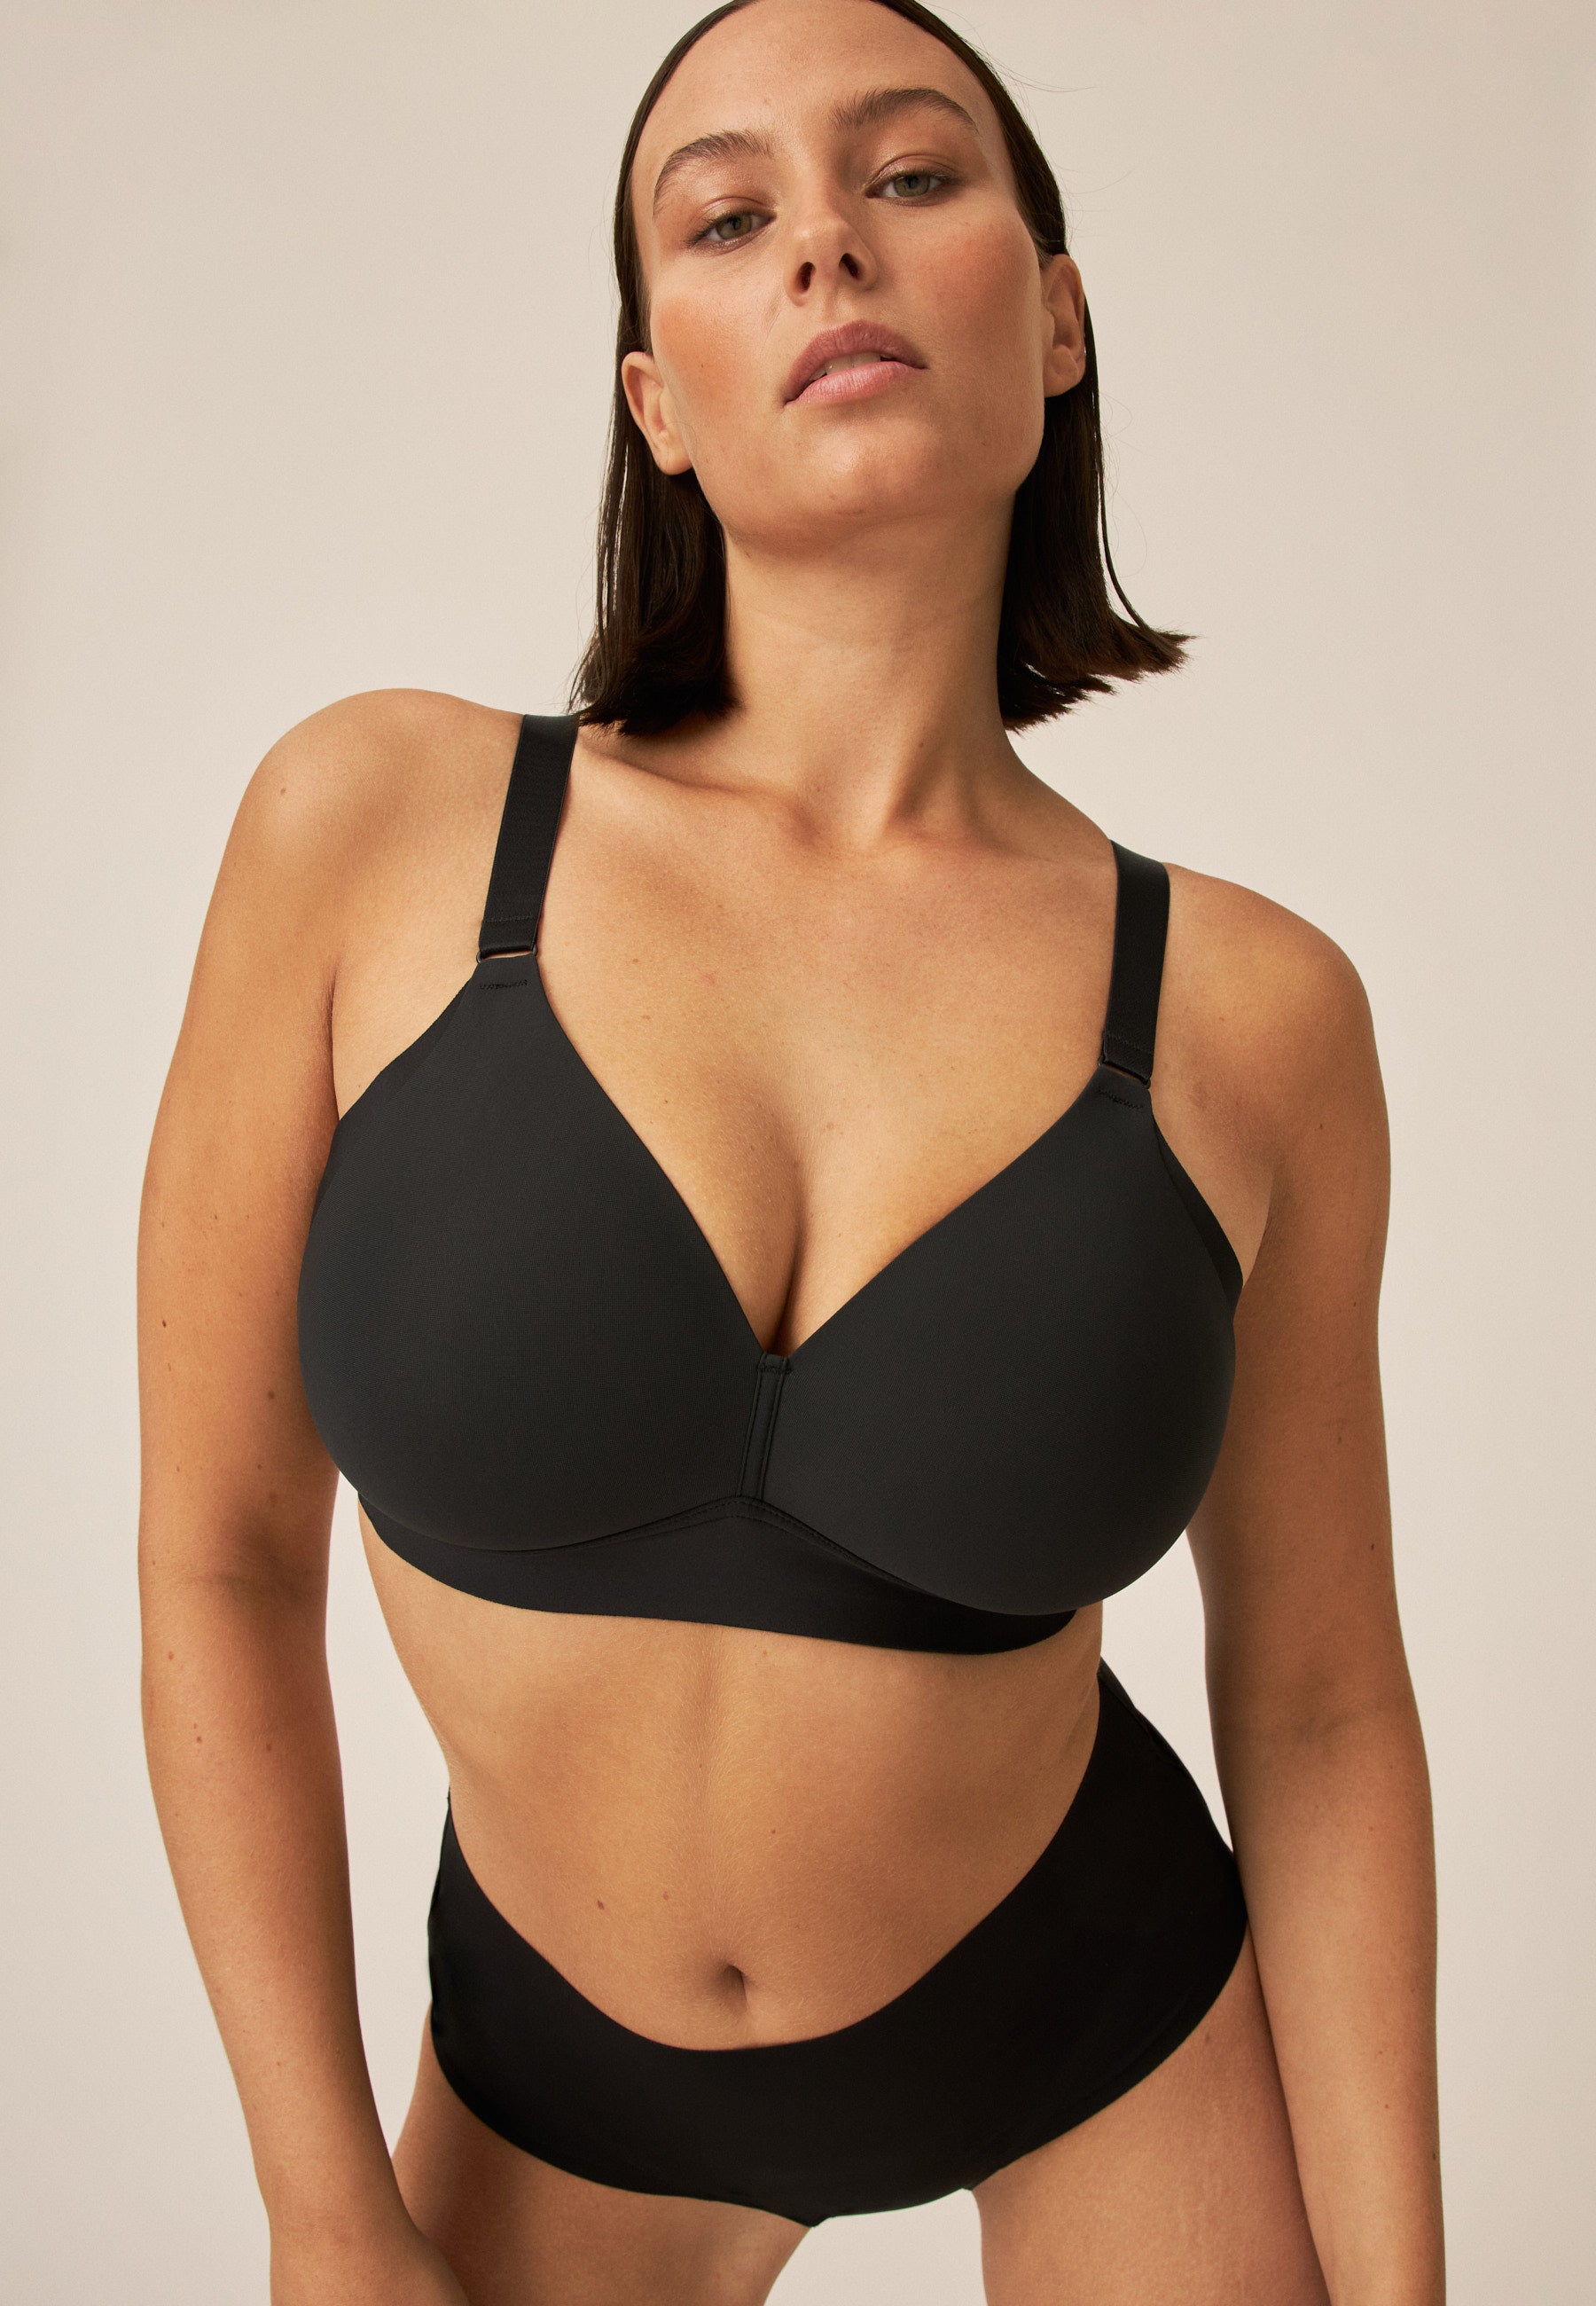 Buy bras without underwire online